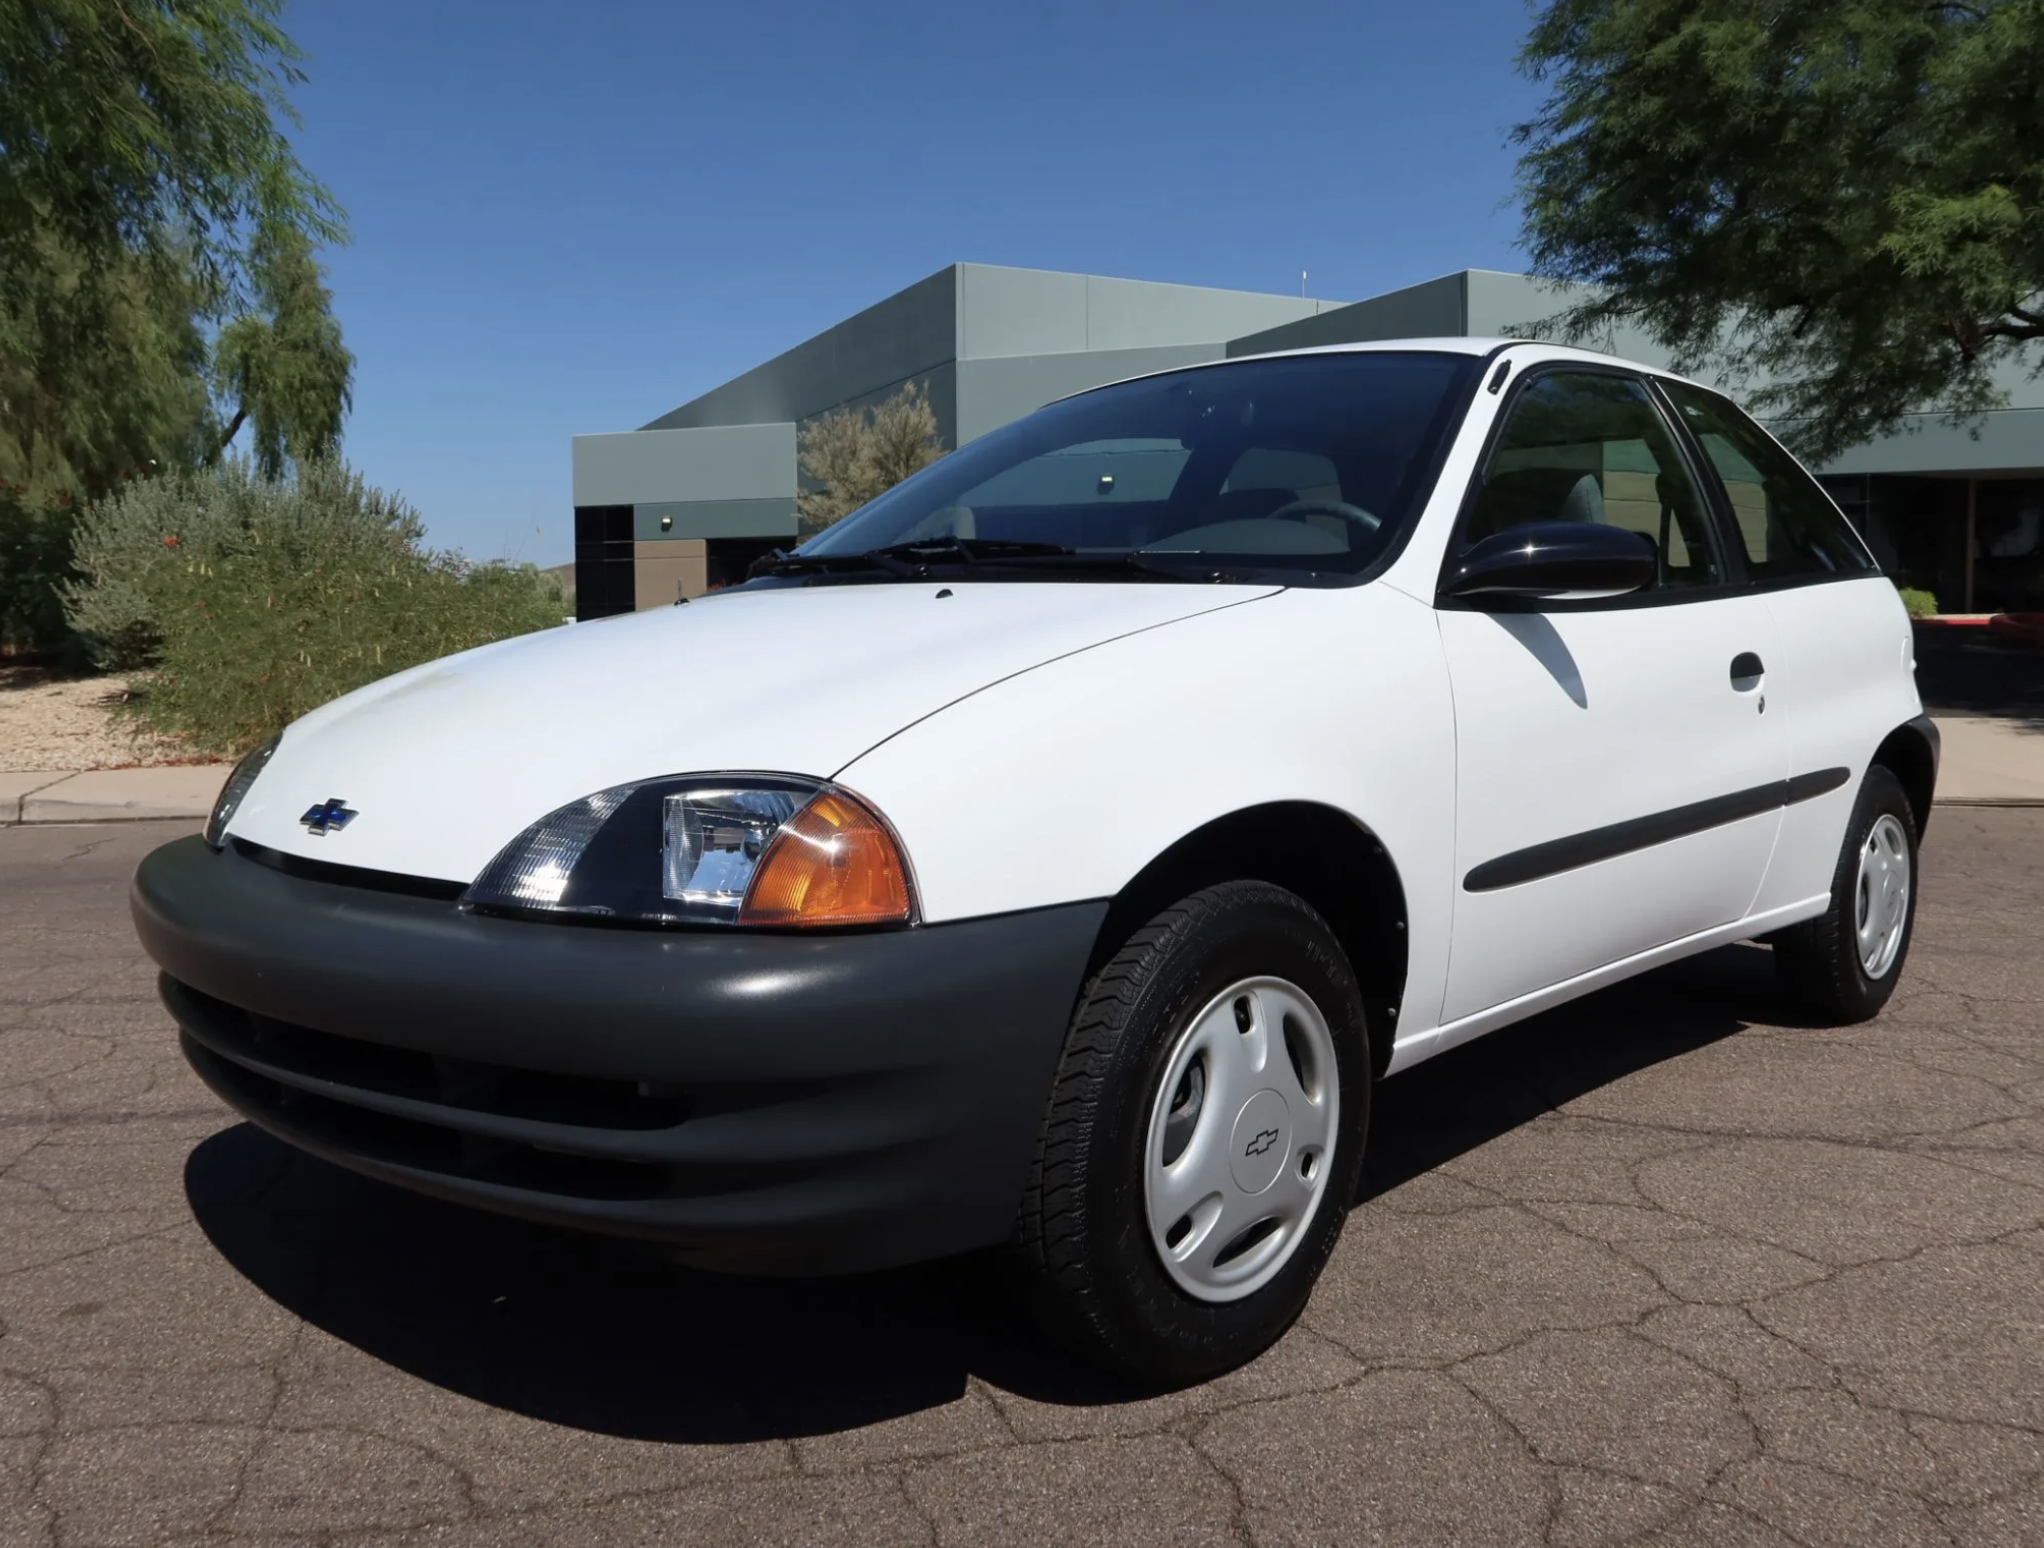 400-Mile 2000 Chevrolet Metro Fetches $18,200 on Bring a Trailer